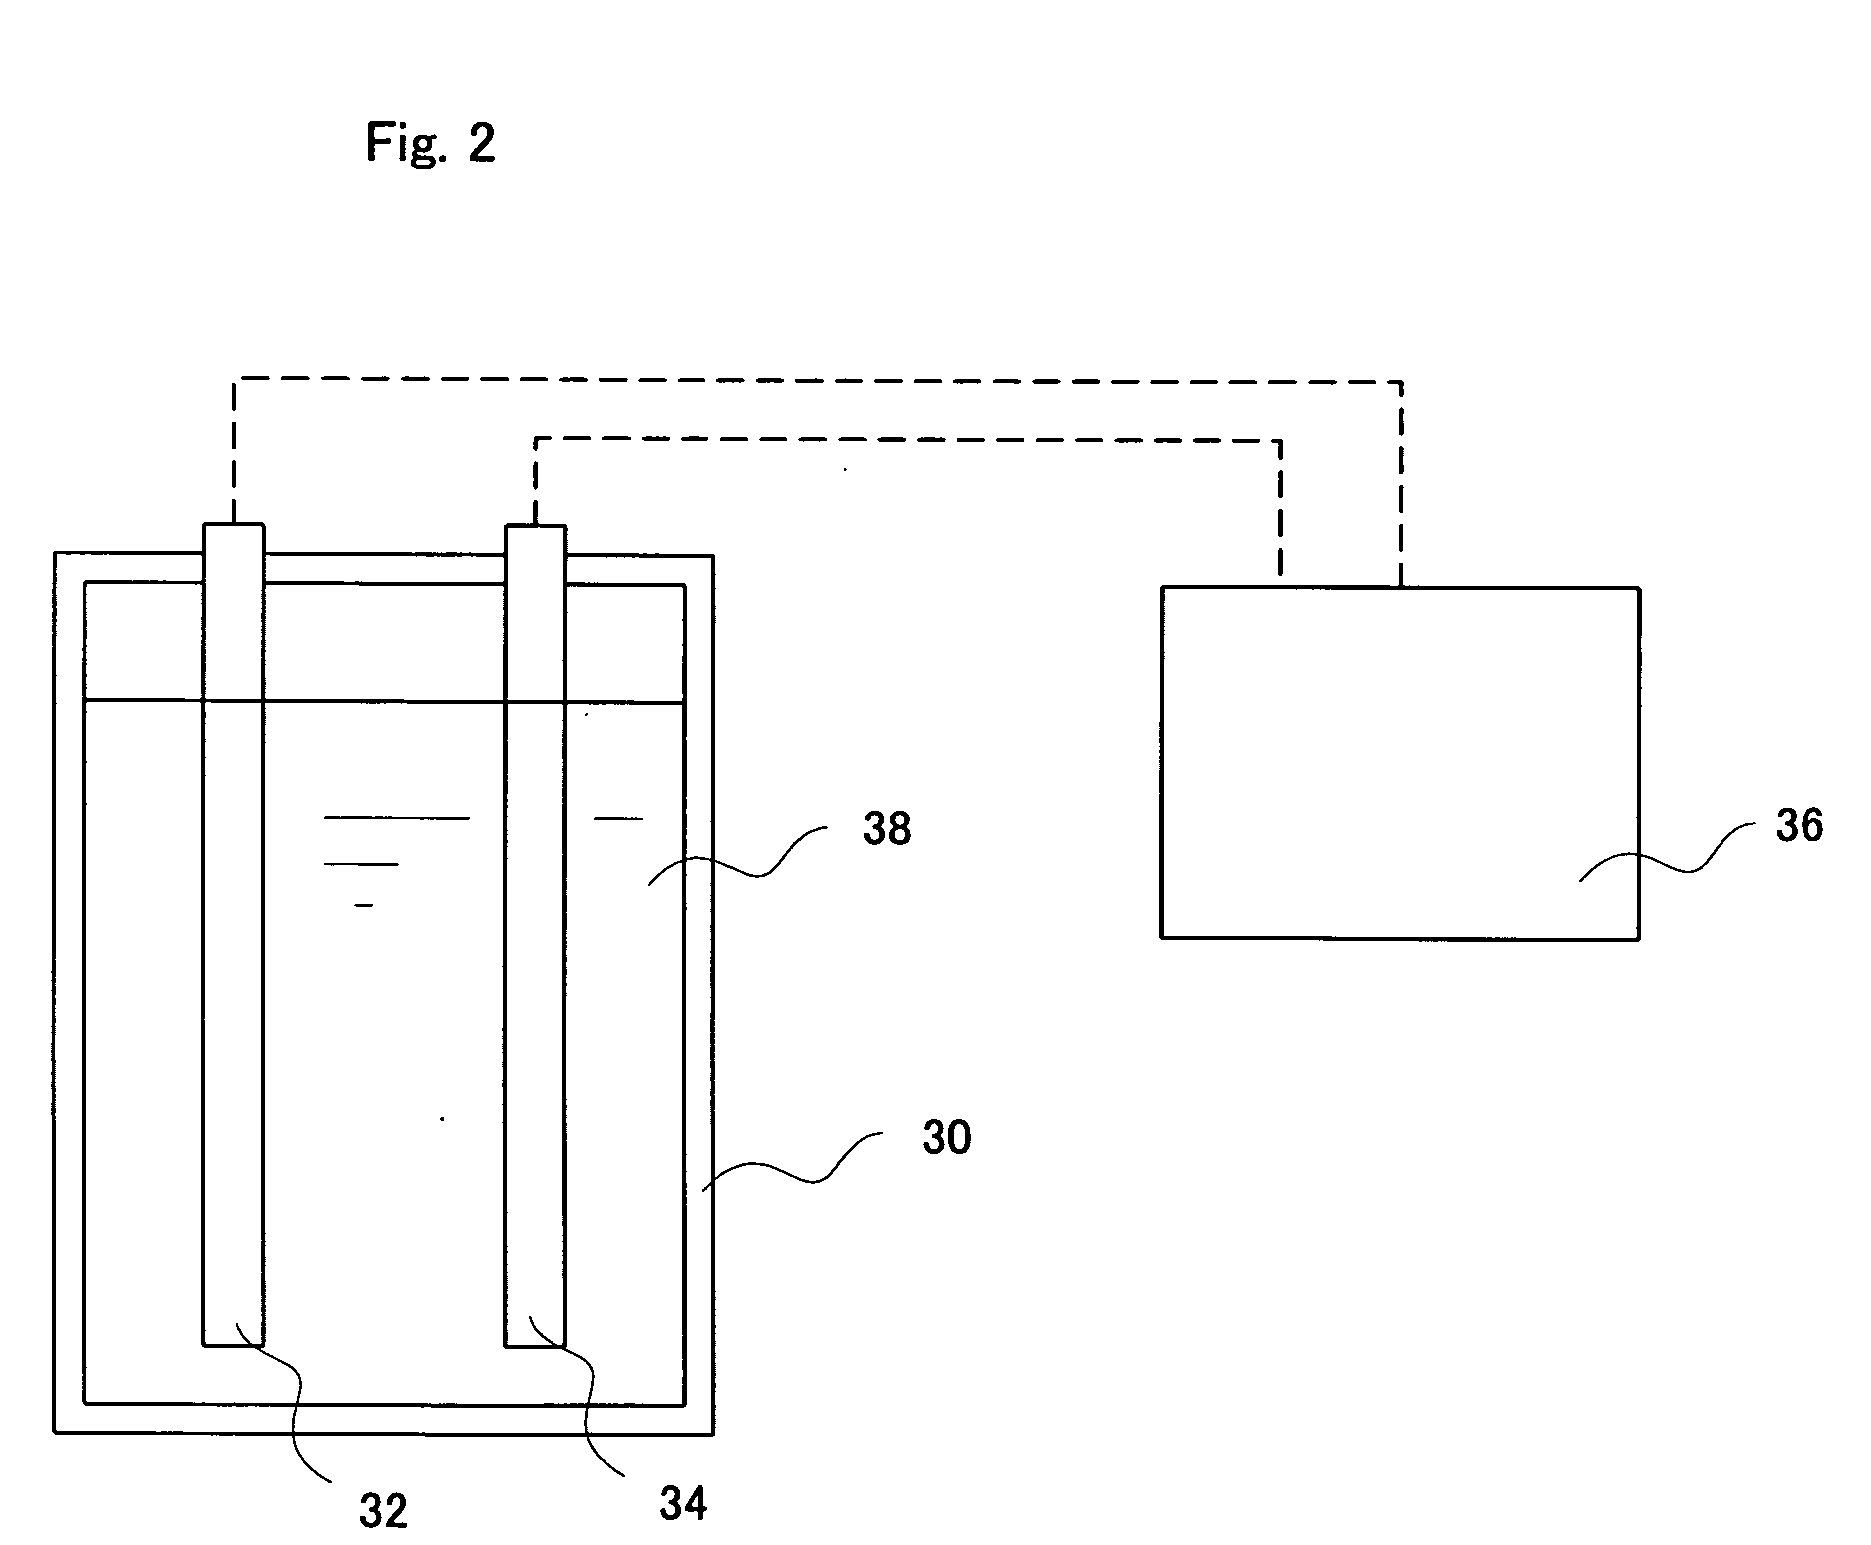 Process for preducing mixed electrolyzed water